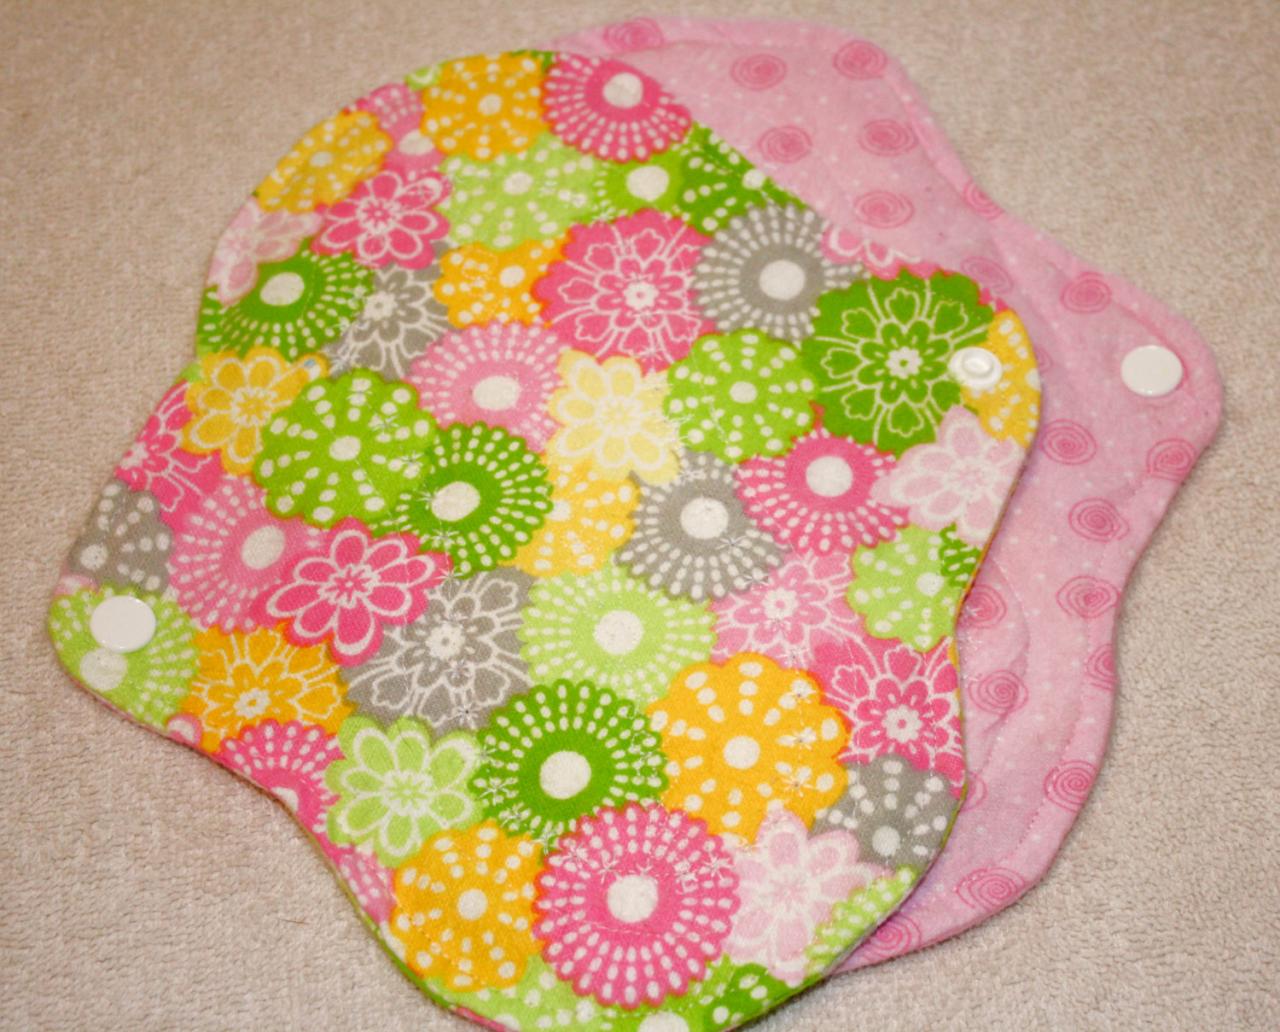 Two, 7 Inch Washable Leak Proof Menstrual Pads Choose Your Print